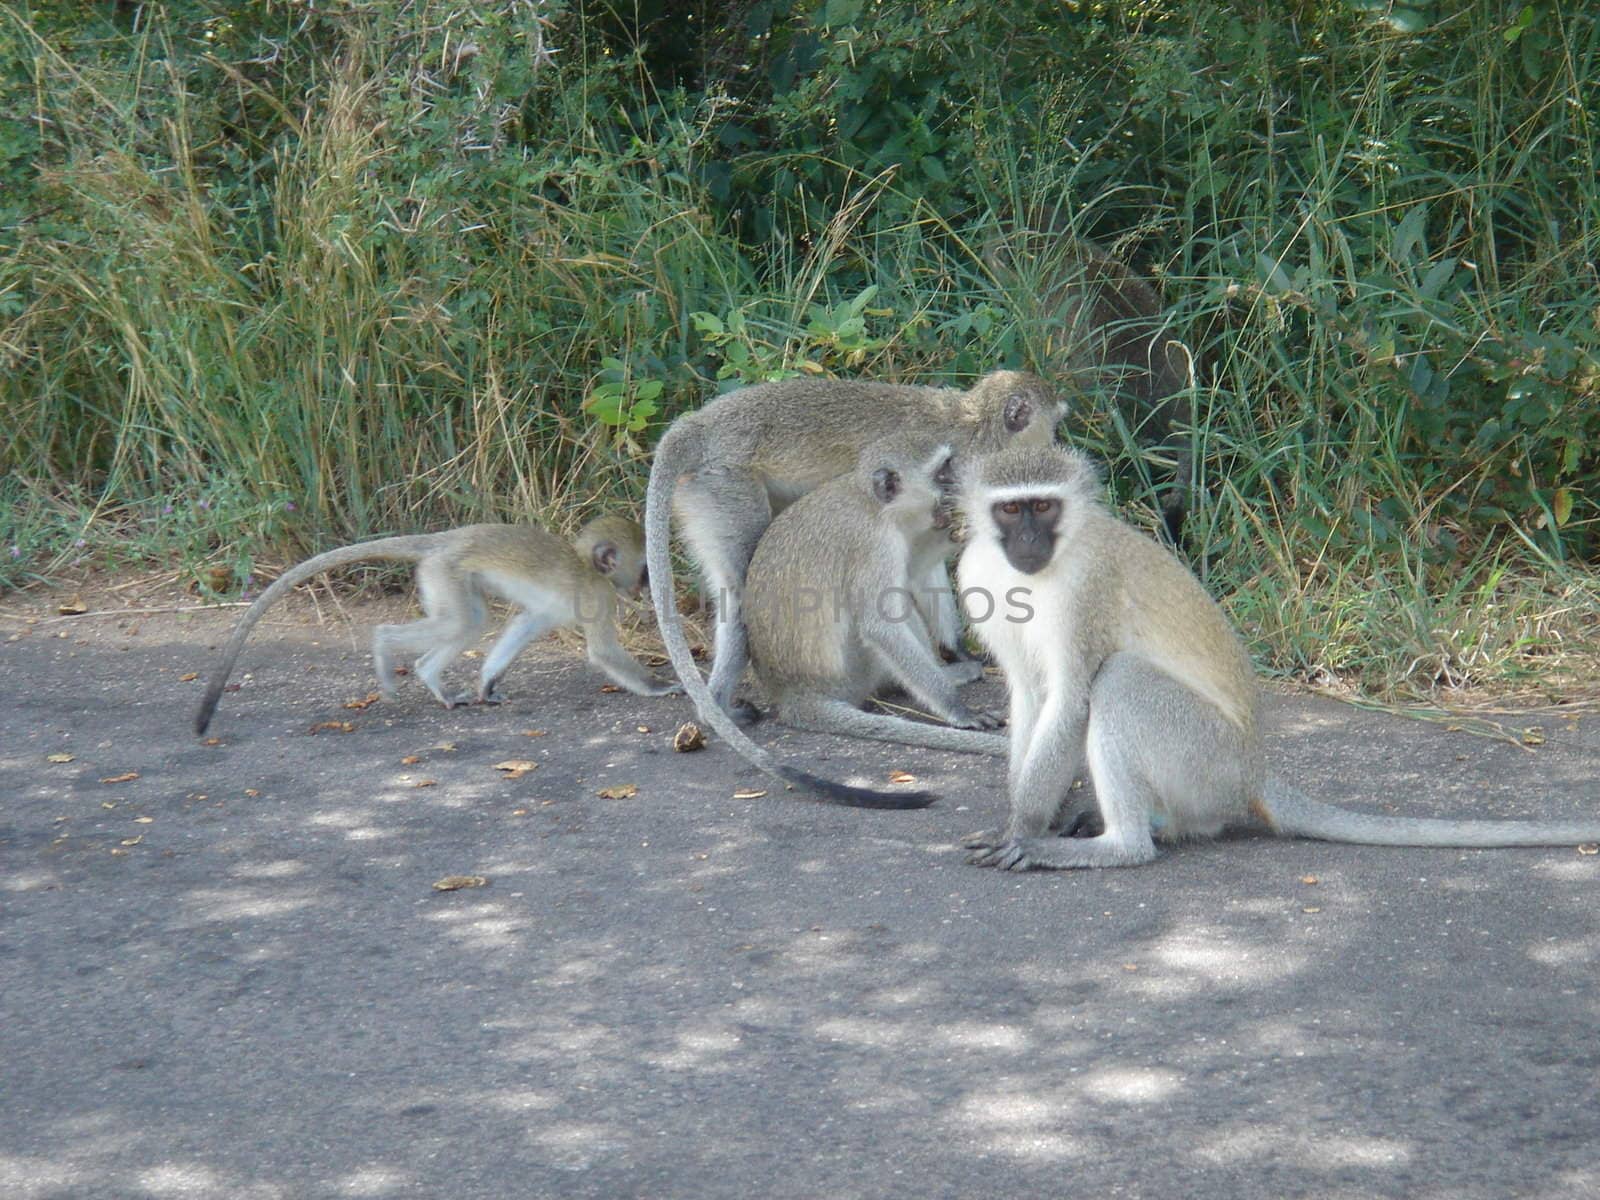 Grey monkeys on the road in kruger park by luissantos84